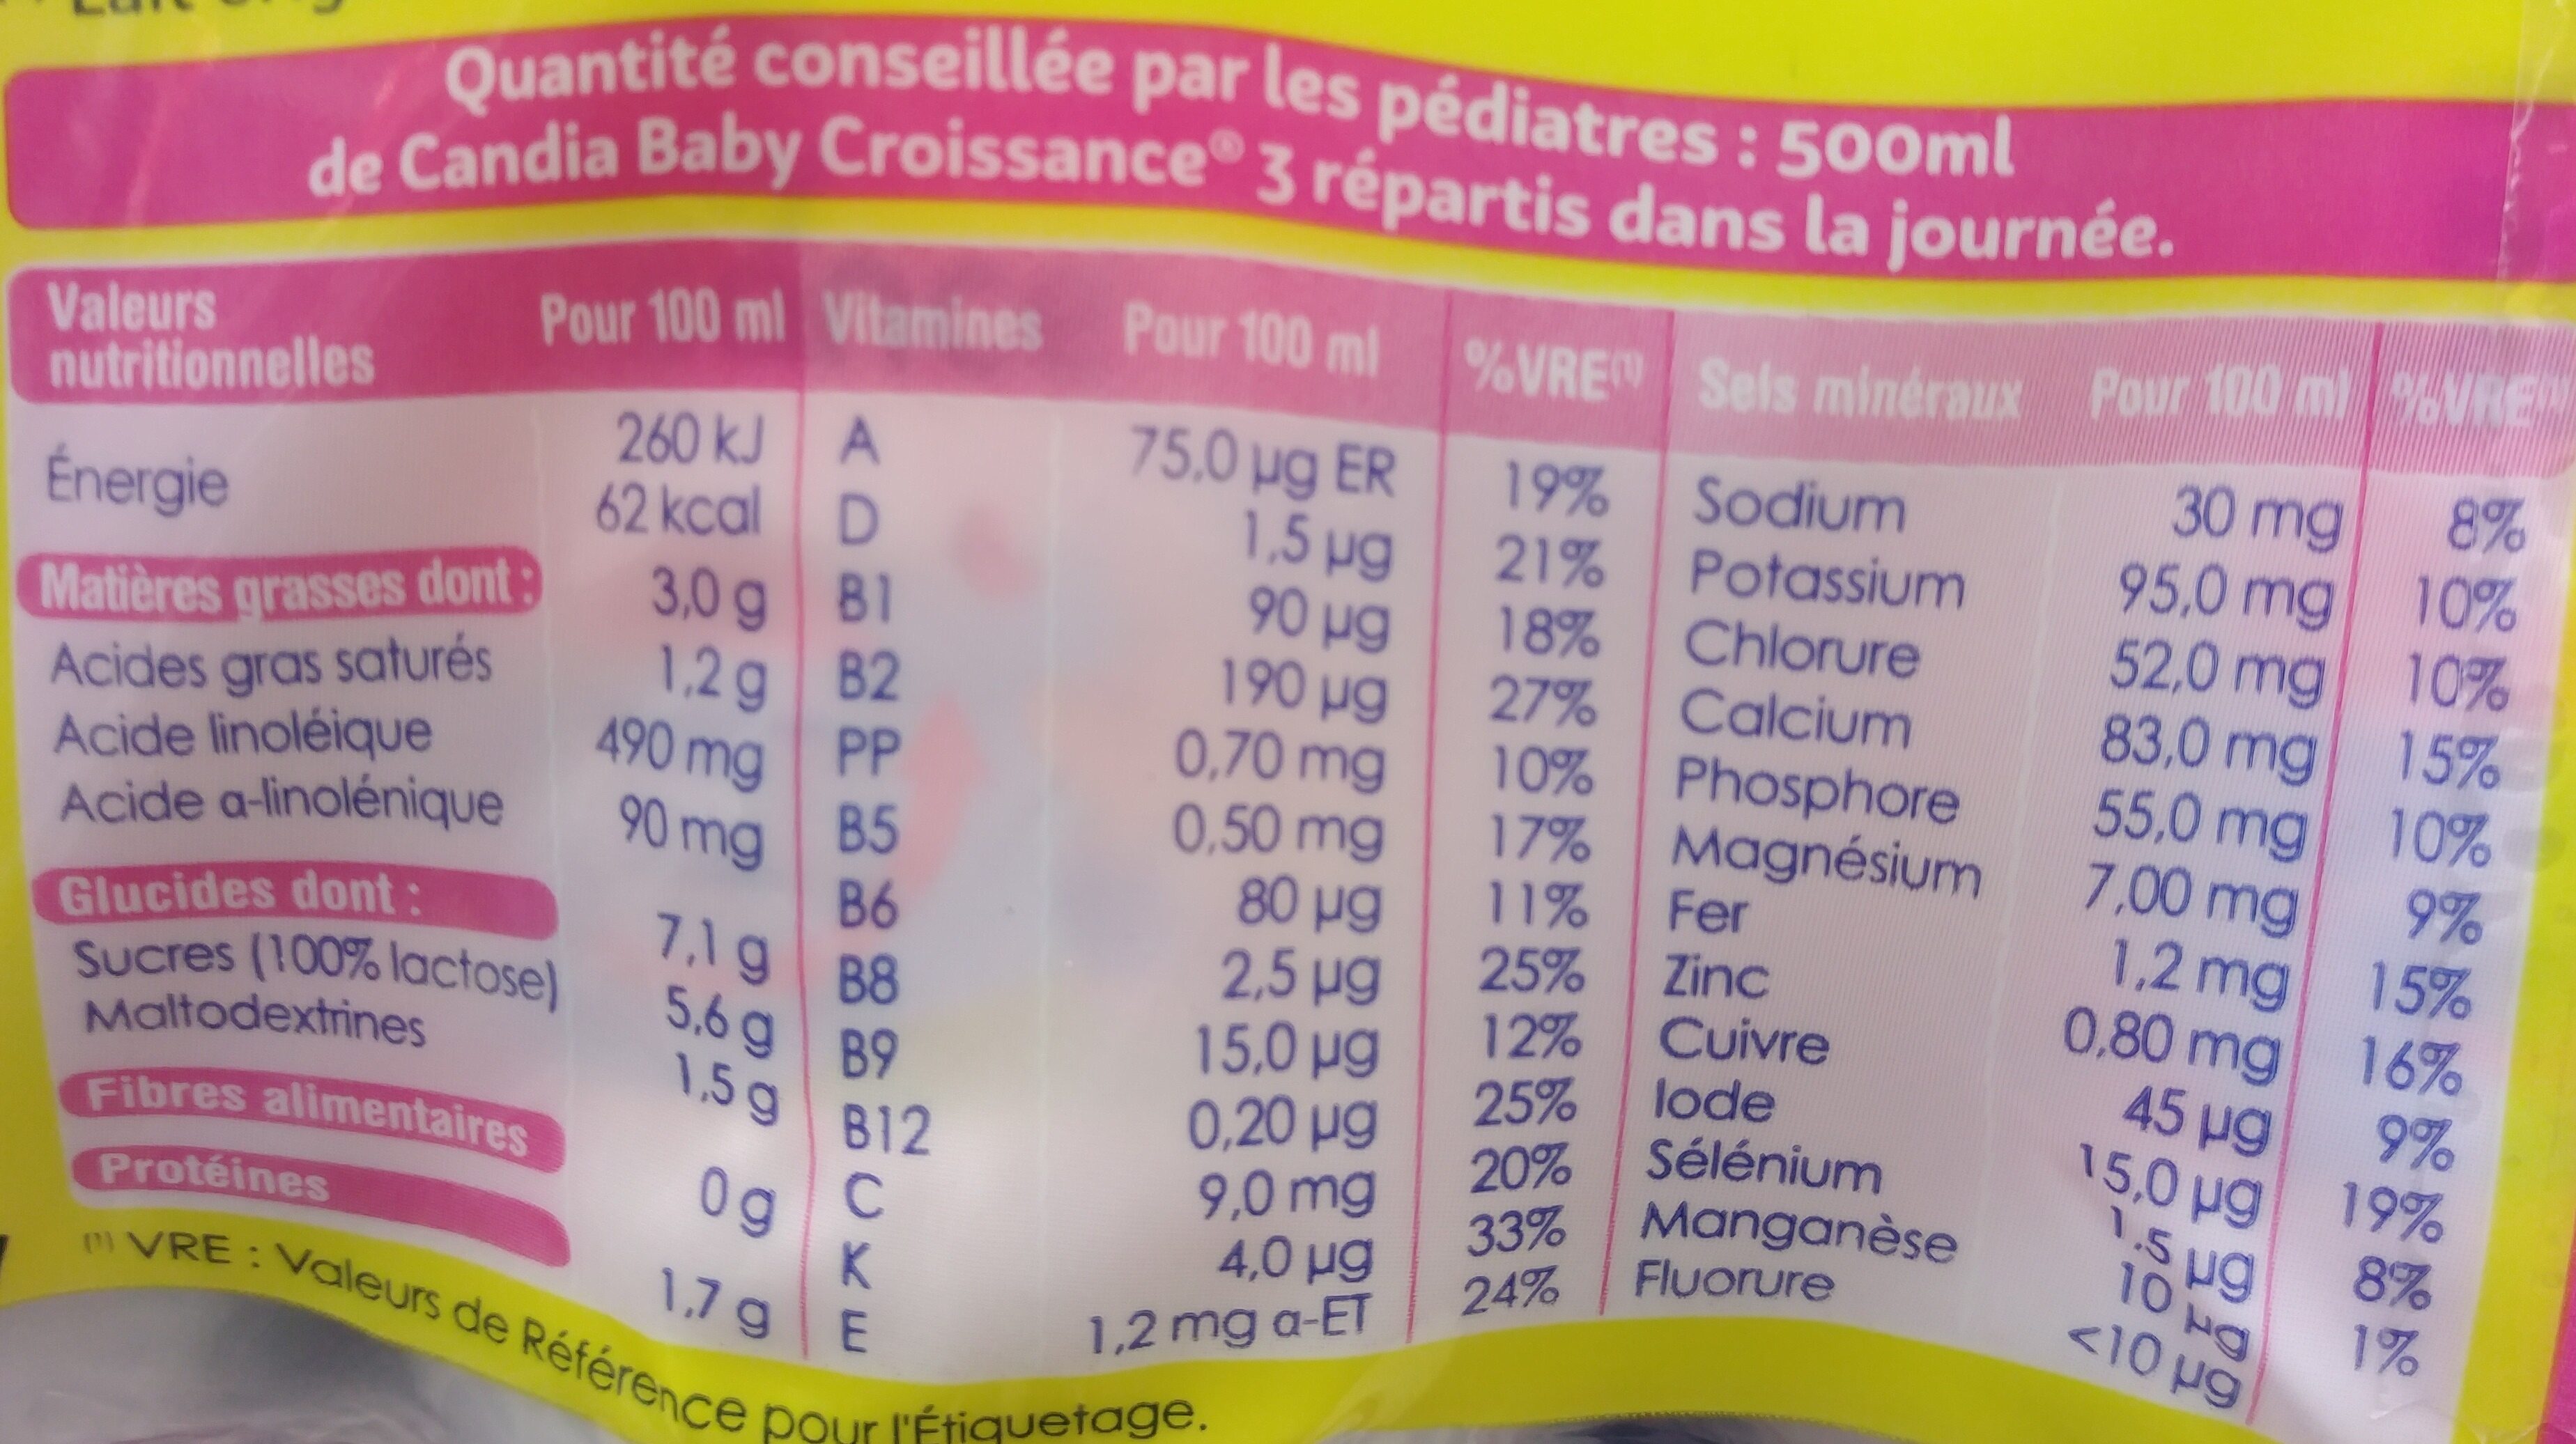 Baby Croissance 3 - Nutrition facts - fr